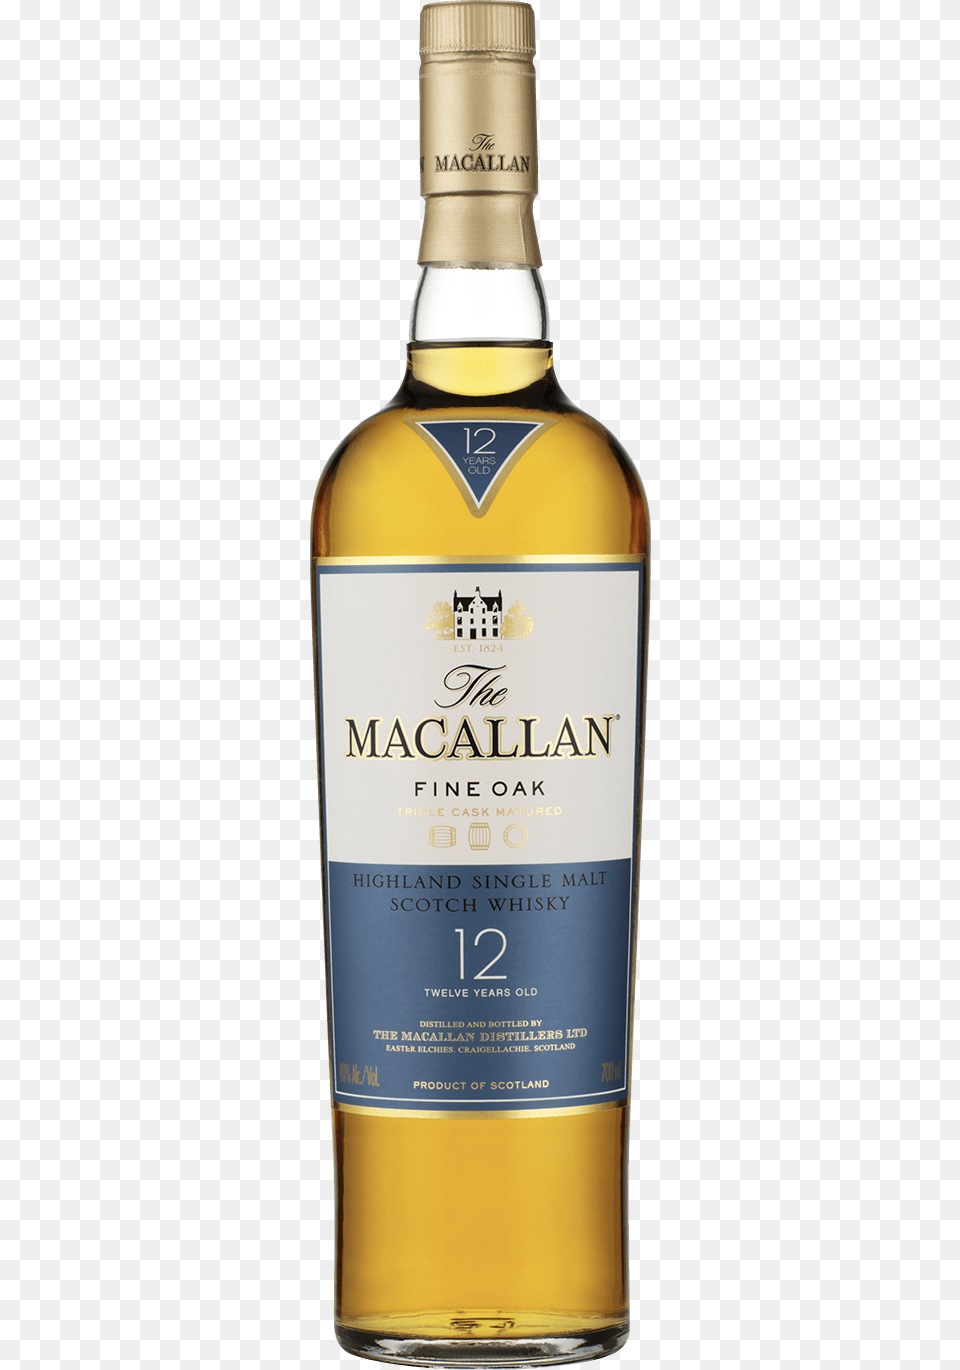 The Macallan Fine Oak 12 Years Old Whisky Macallan, Alcohol, Beverage, Liquor, Bottle Png